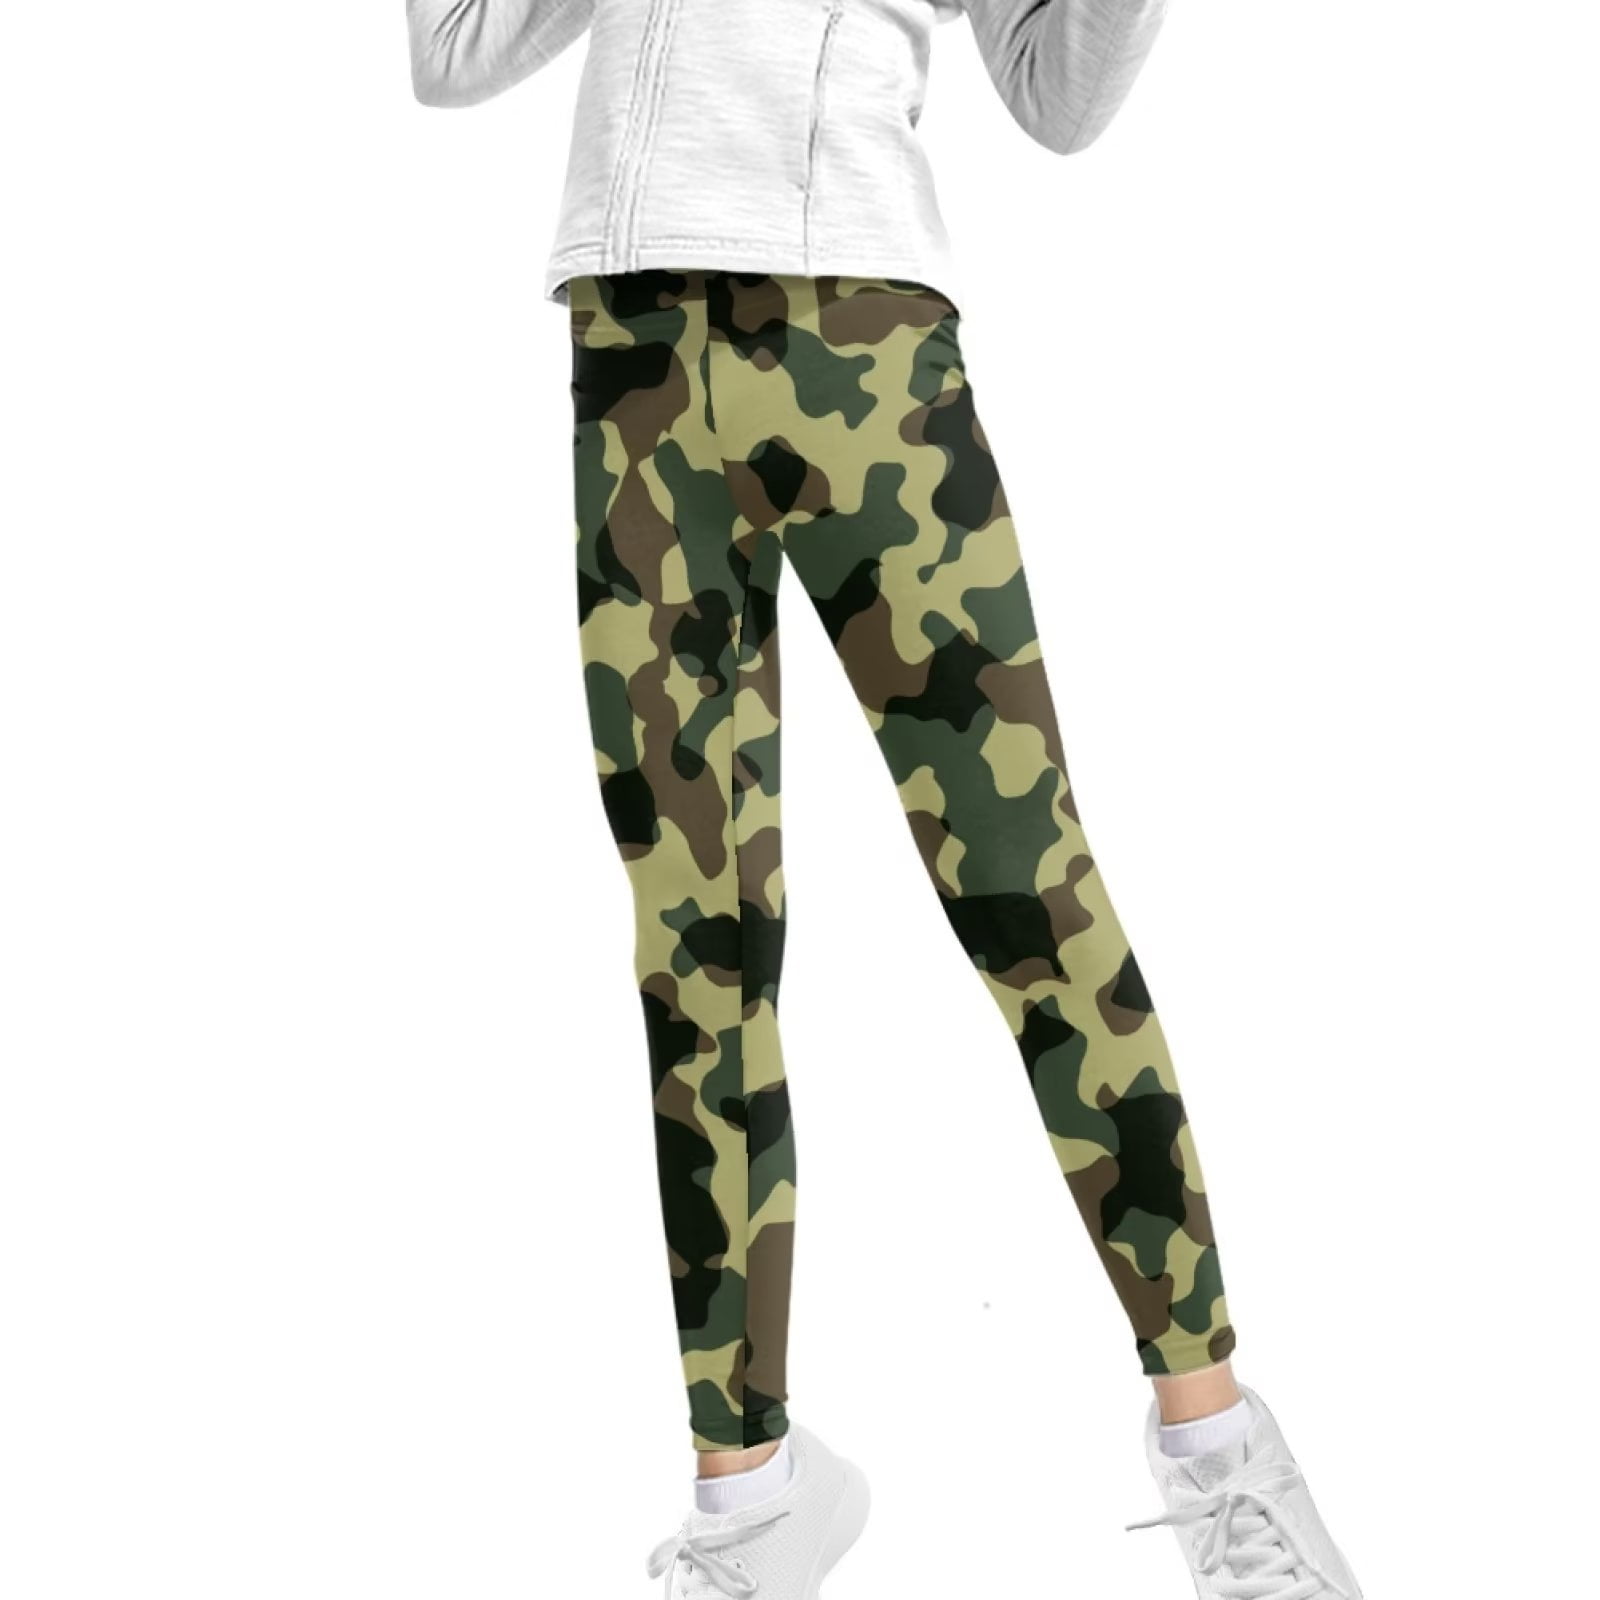 Green Camo Leggings - Kid's (18m to 7yrs) Camouflage Leggings - Sustainable  Outdoor Clothing, Camouflage Gear, Stitch & Simon